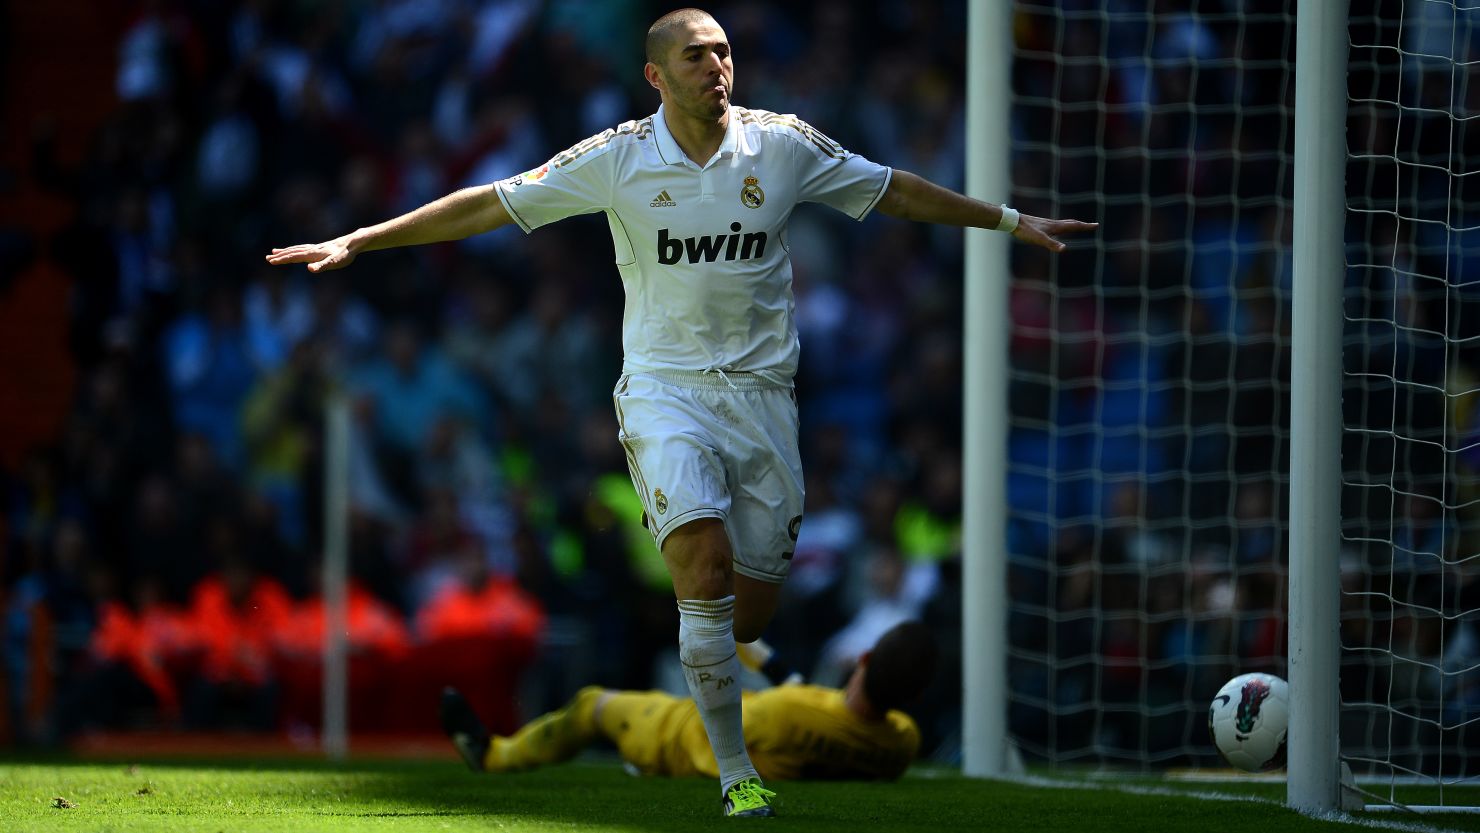 French international Karim Benzema celebrates scoring Real Madrid's second goal in a 3-0 win against Sevilla on Saturday 